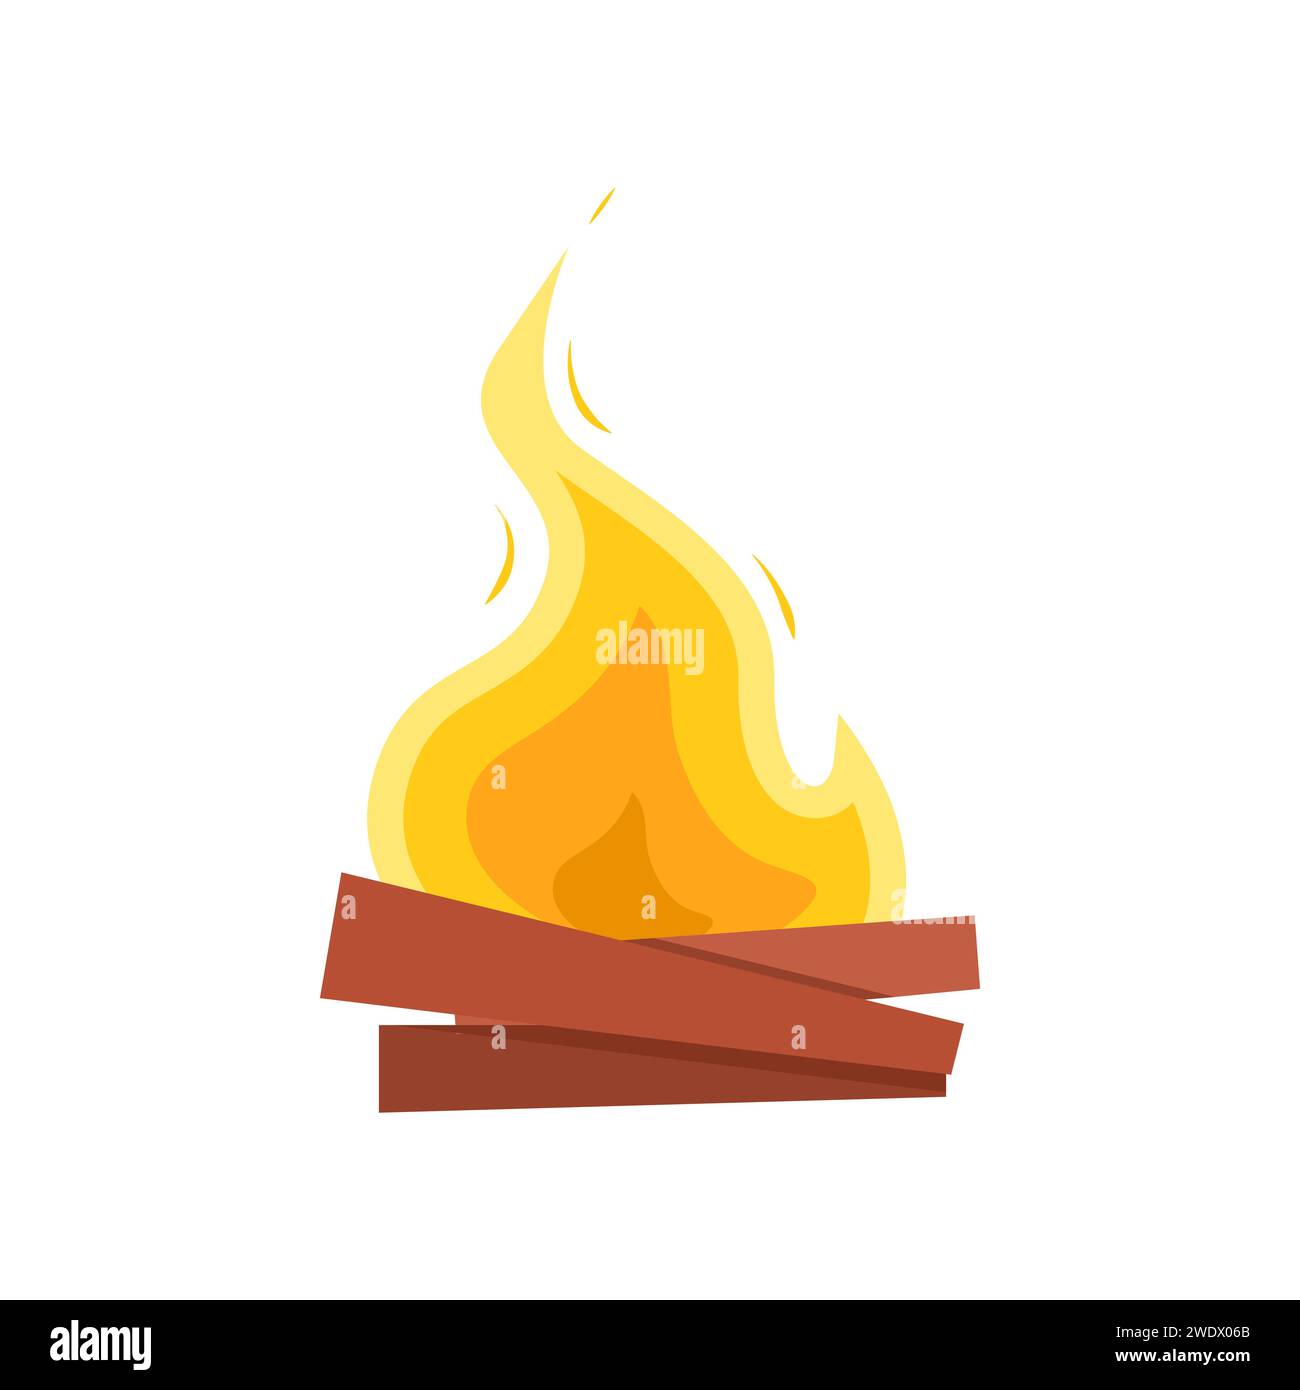 Burning campfire or bonfire on wooden logs isolated on white background. Design element of flame on firewood. Orange cartoon blaze. Colorful flat vect Stock Vector